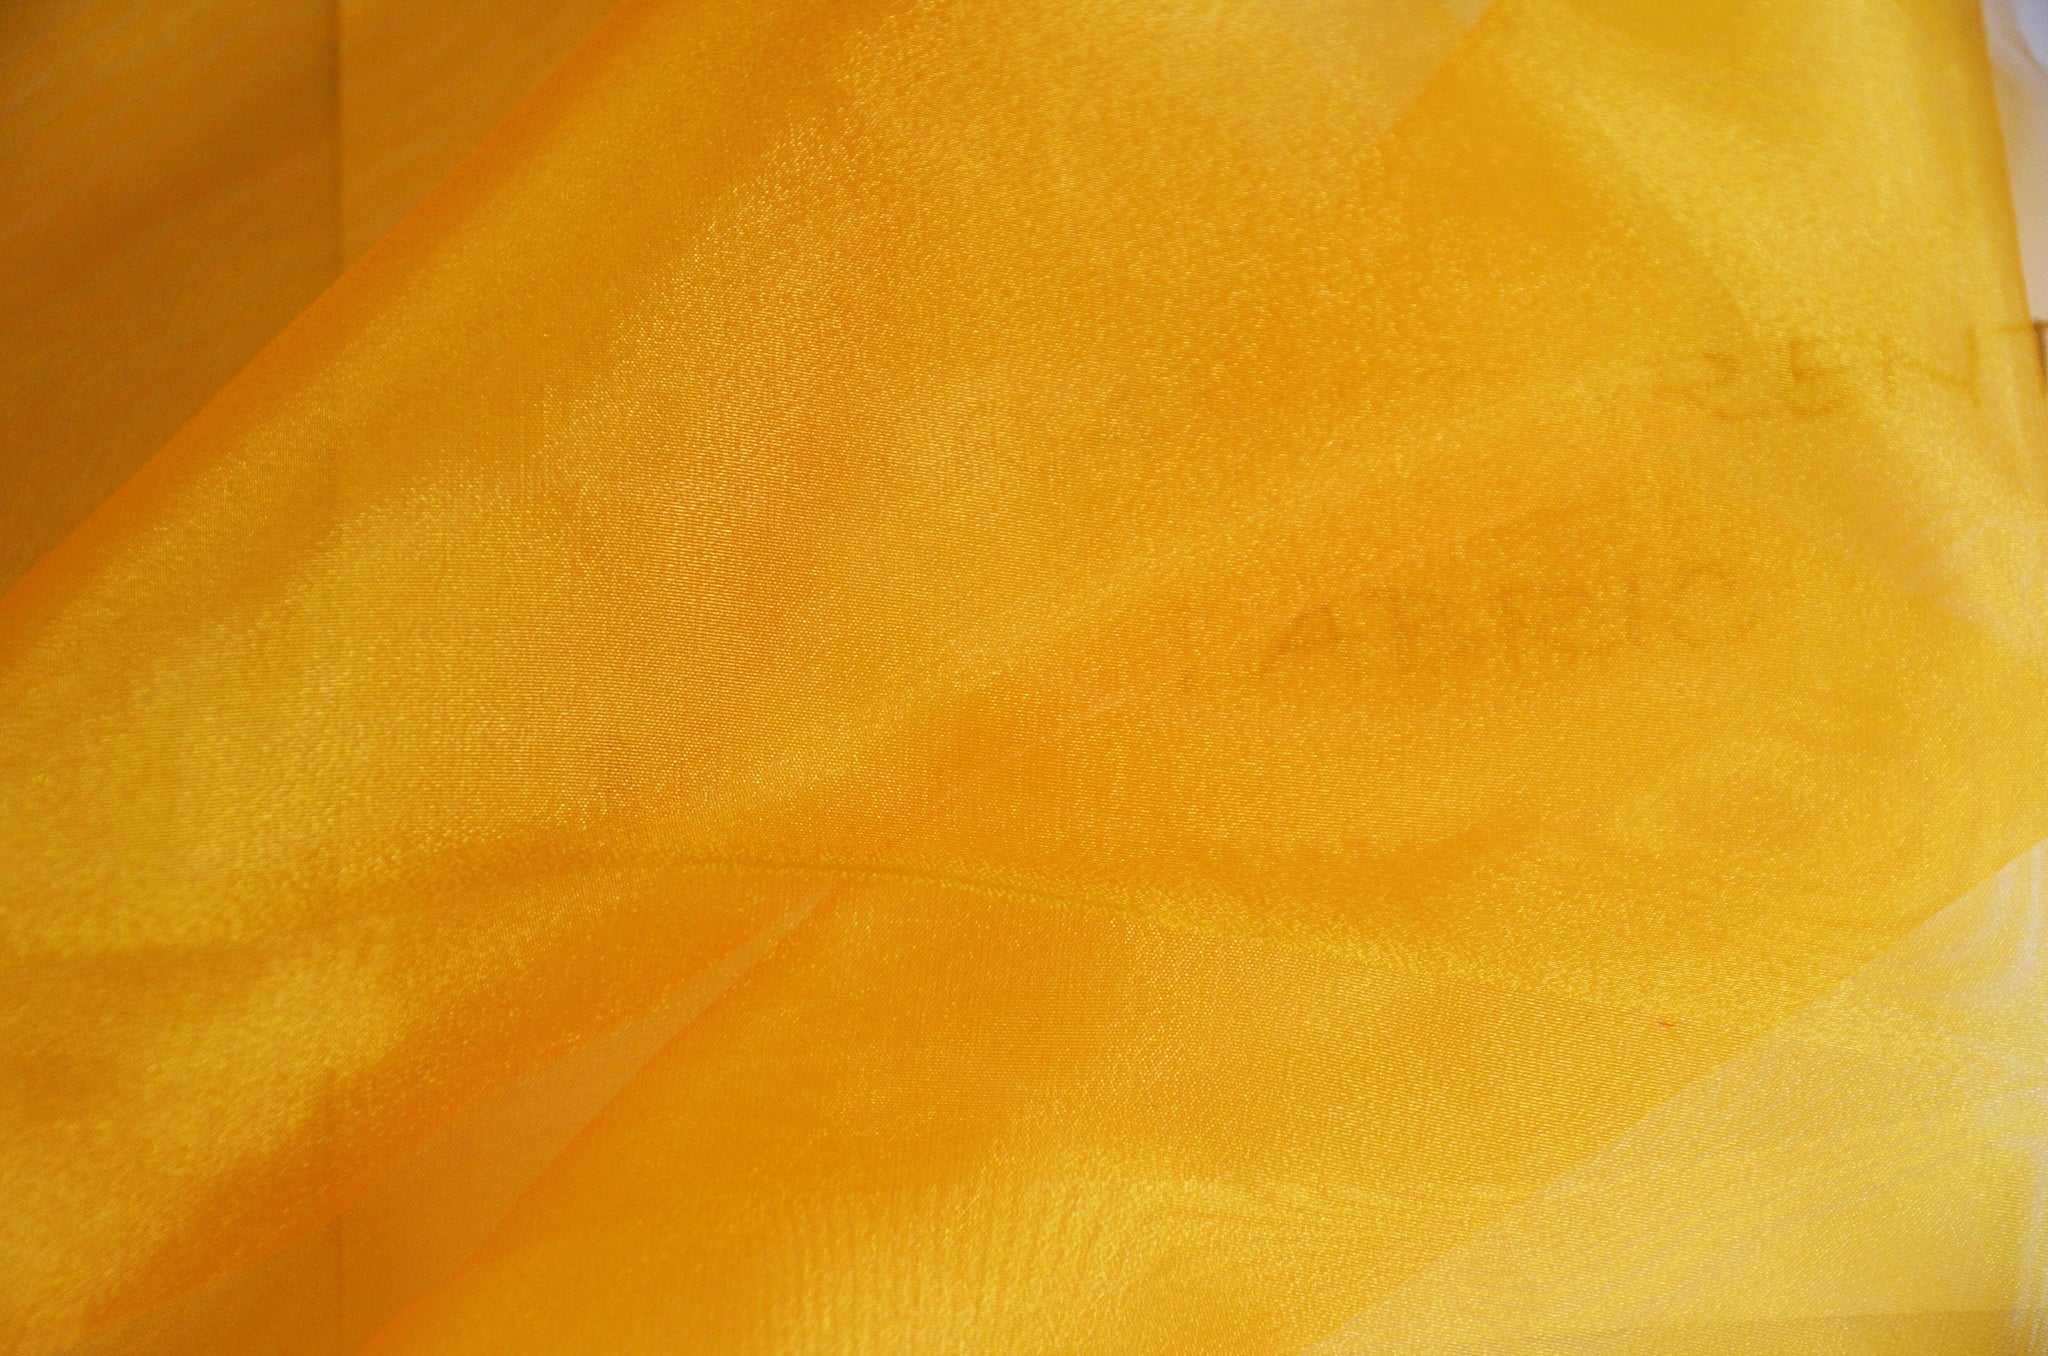 Crystal Sheer Organza Fabric By The Roll (100 Yards) 25 Colors